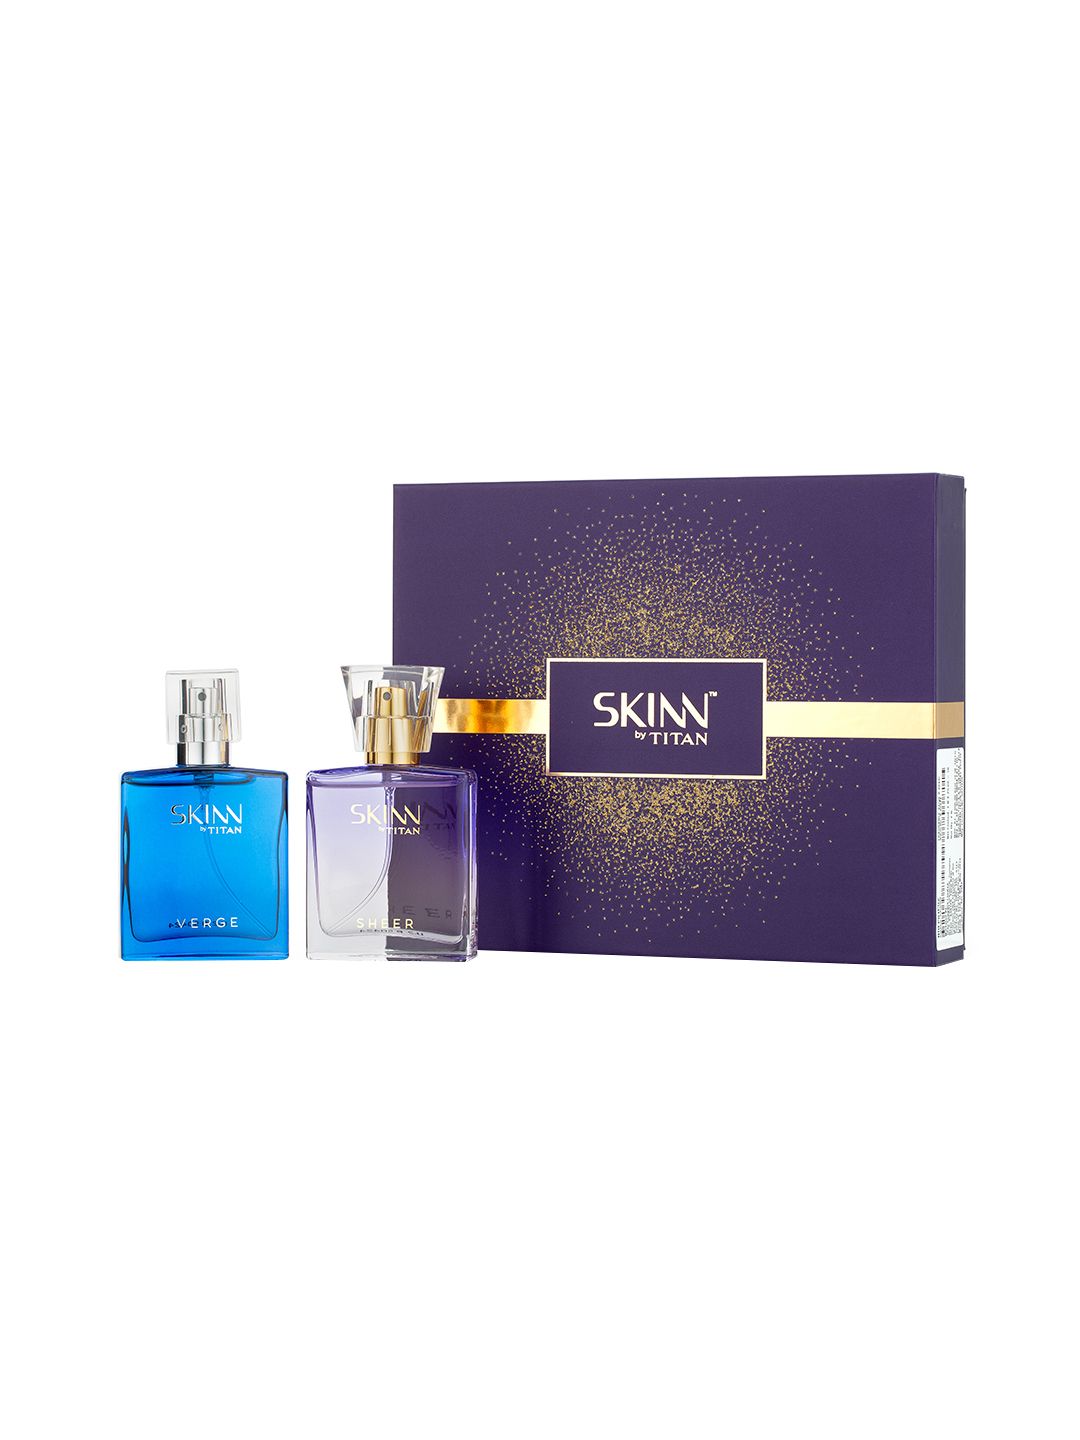 SKINN by Titan Set of 2 Verge & Sheer Mini Gift Set Perfumes for His & Her Price in India